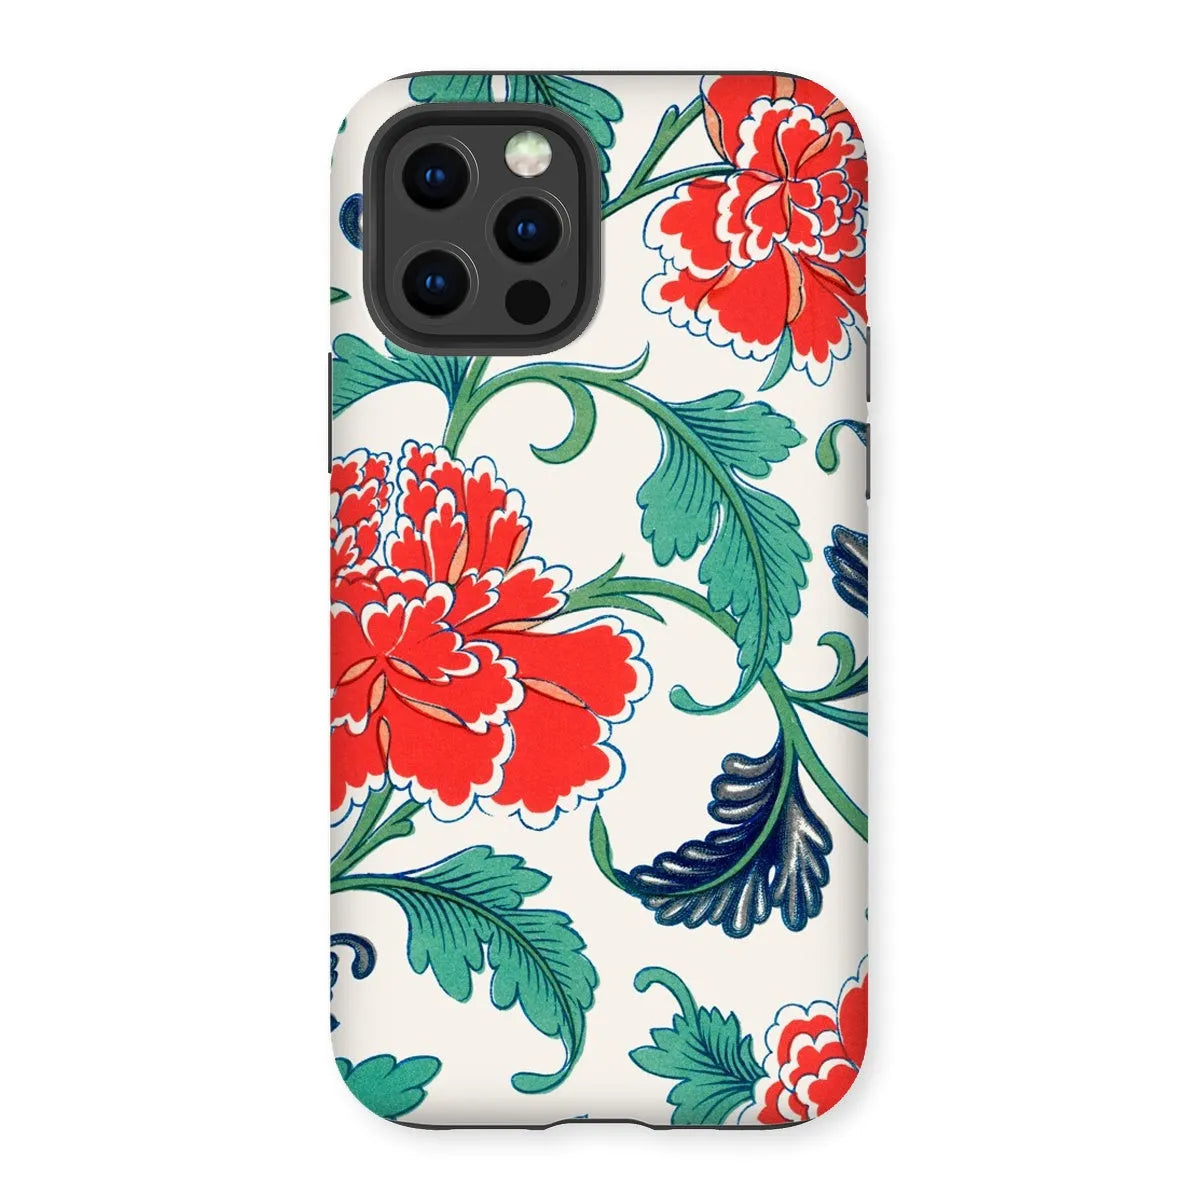 Red Floral Chinese Aesthetic Pattern Phone Case - Owen Jones - Iphone 12 Pro / Matte - Mobile Phone Cases - Aesthetic